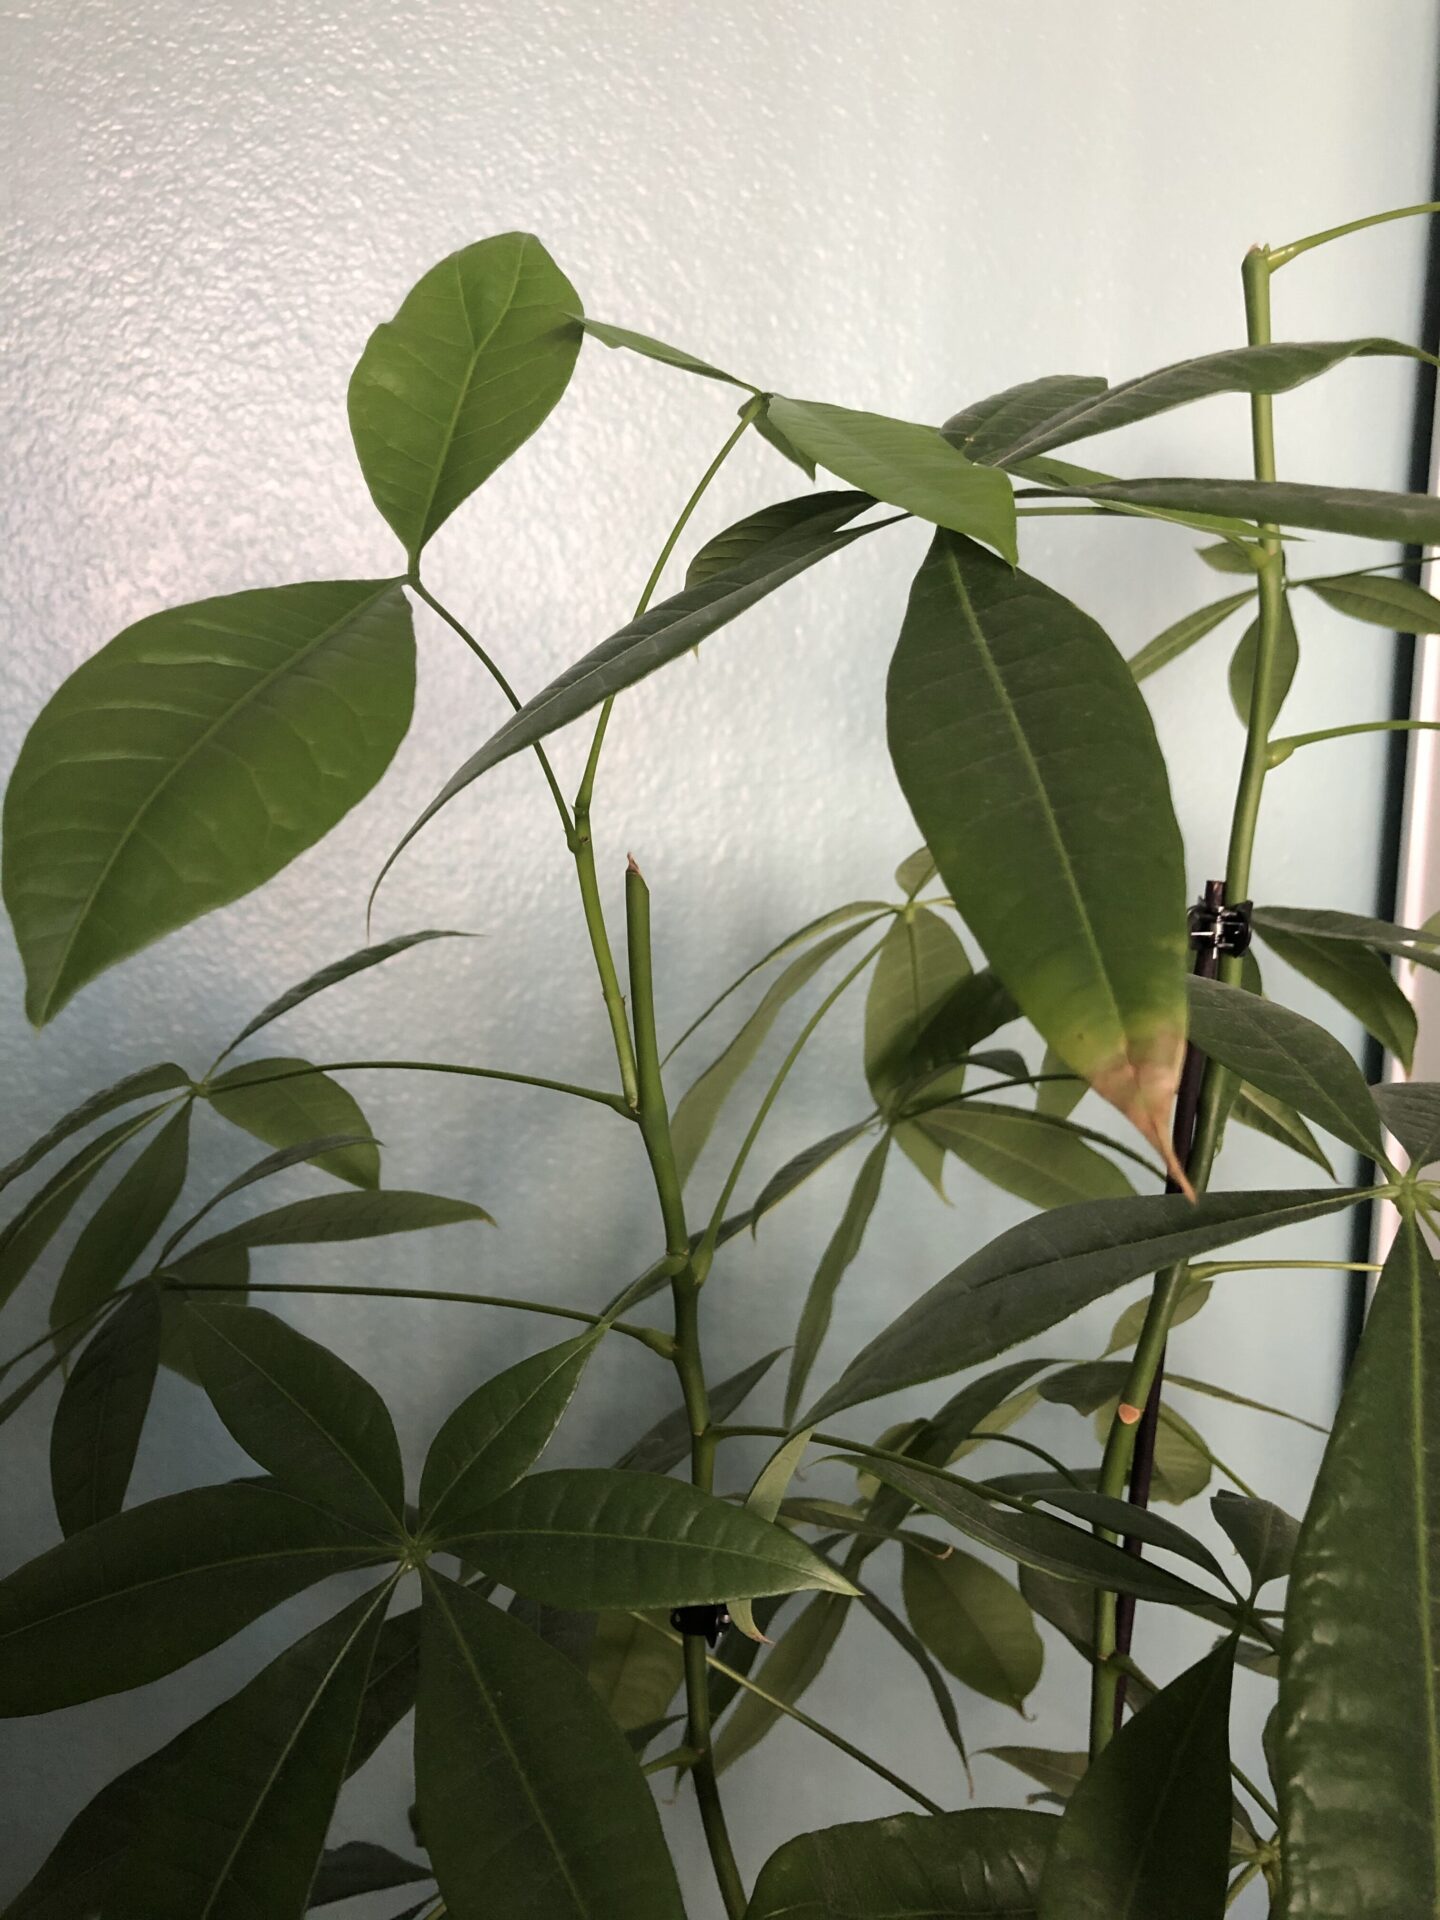 Horticulture: Propagating My Money Tree - Bobbieness